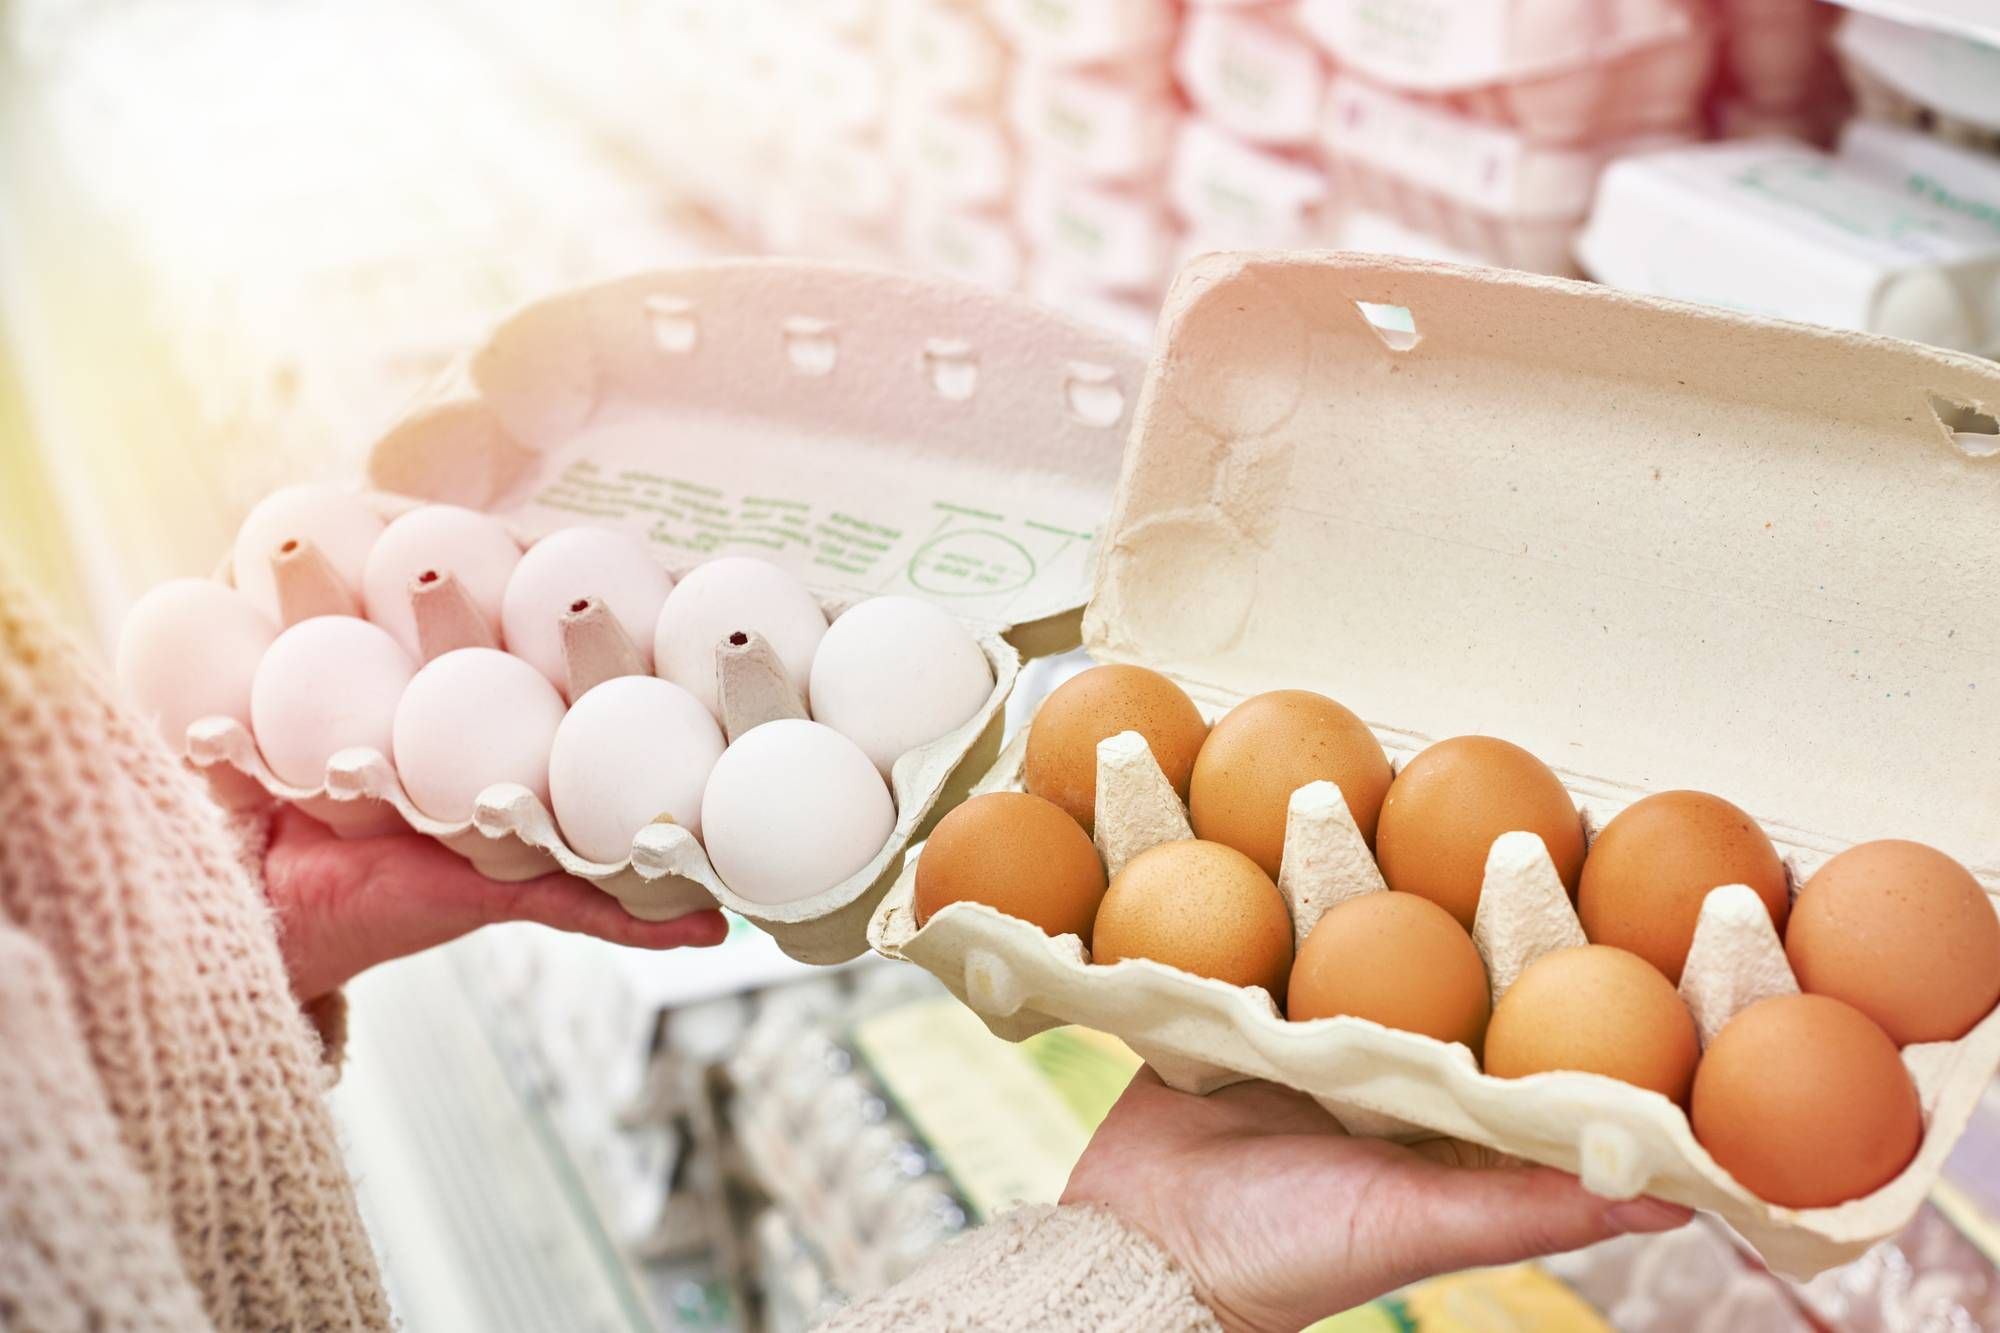 Egg prices in New York were allegedly increased unlawfully during the coronavirus outbreak.